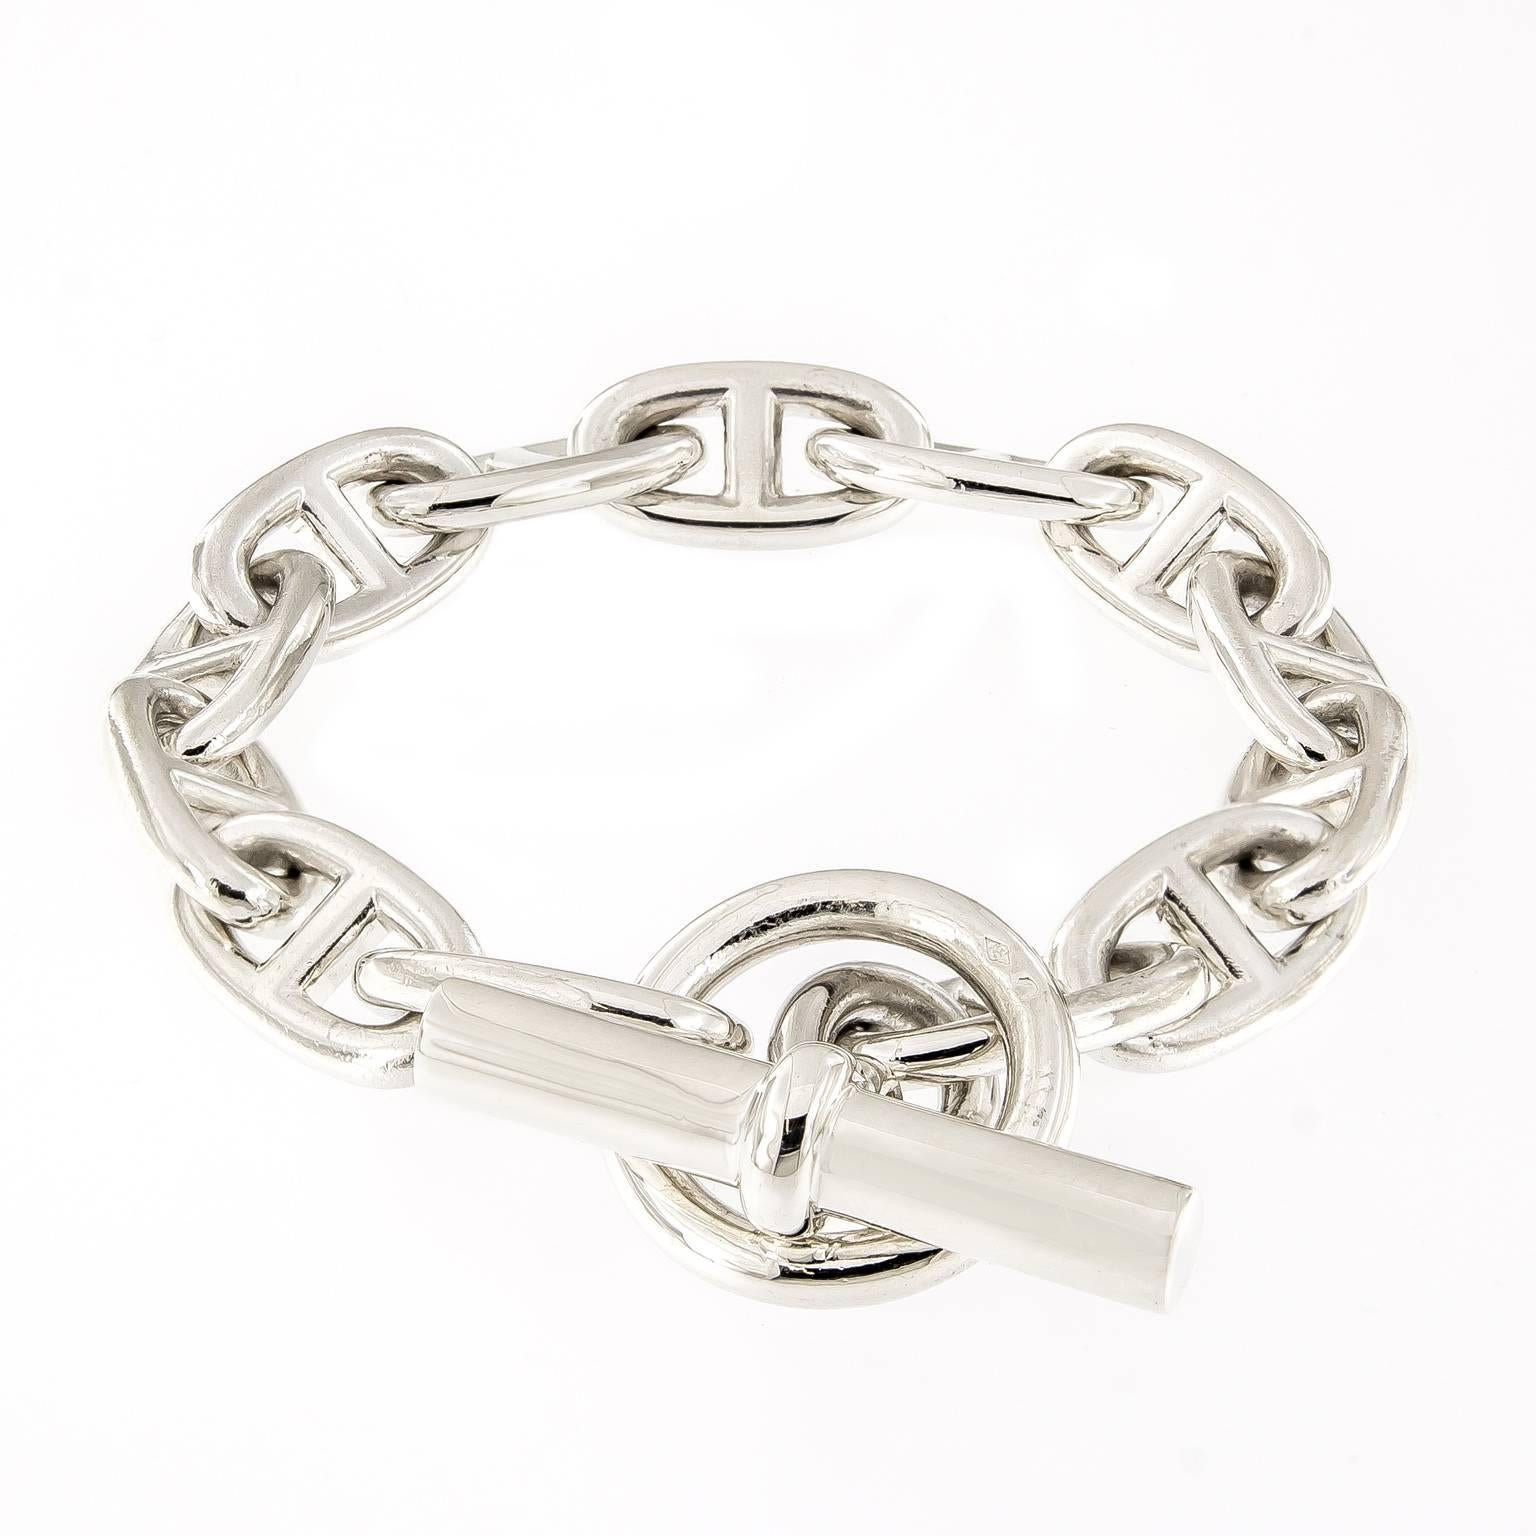 Classic anchor link design inspired from the anchor chains of large naval vessels. Crafted in sterling silver with a toggle clasp. 8 in Long (20.32 cm)

Marked Hermes